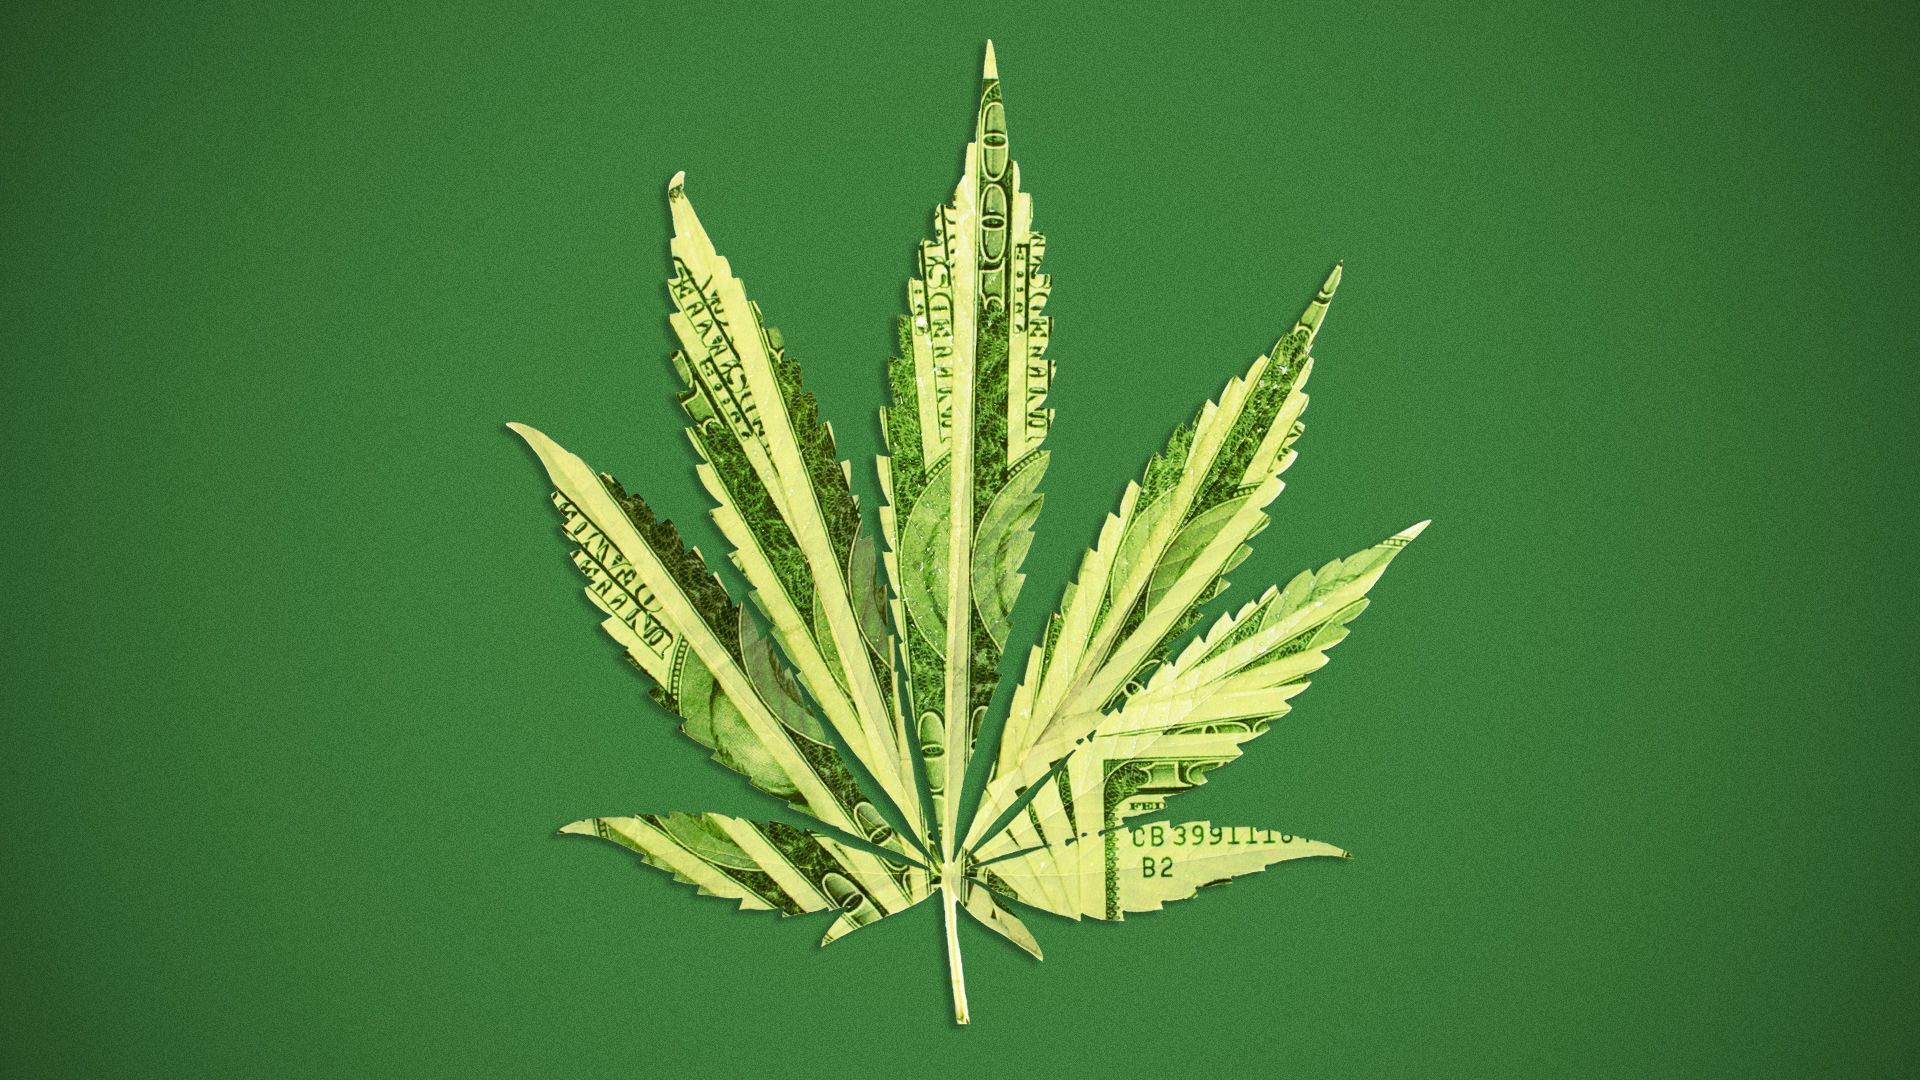 Illustration of a cannabis leaf made of money.